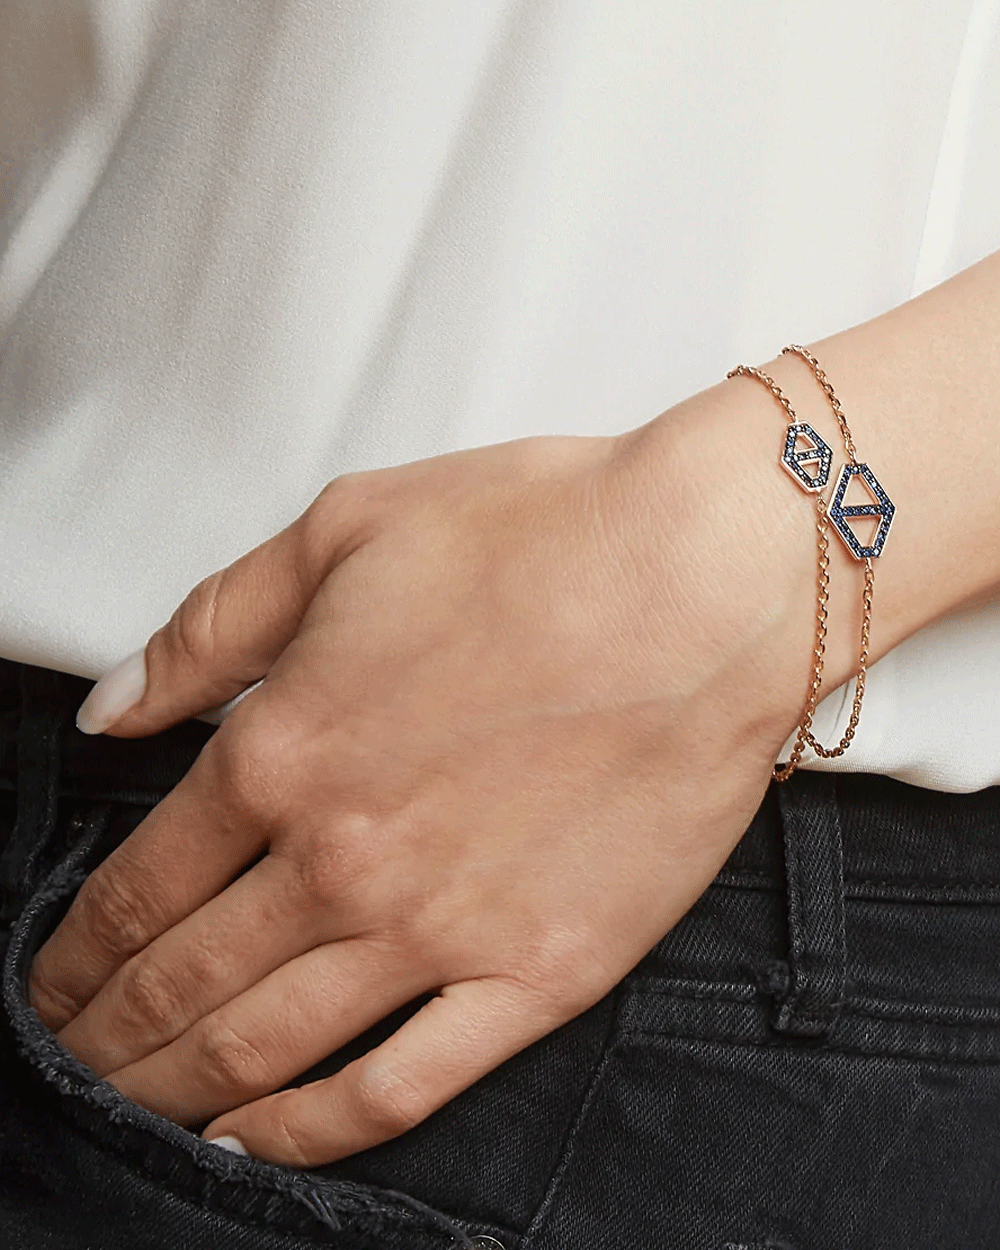 18k Rose Gold Bracelet with Double Sided Diamond and Blue Sapphire Hex